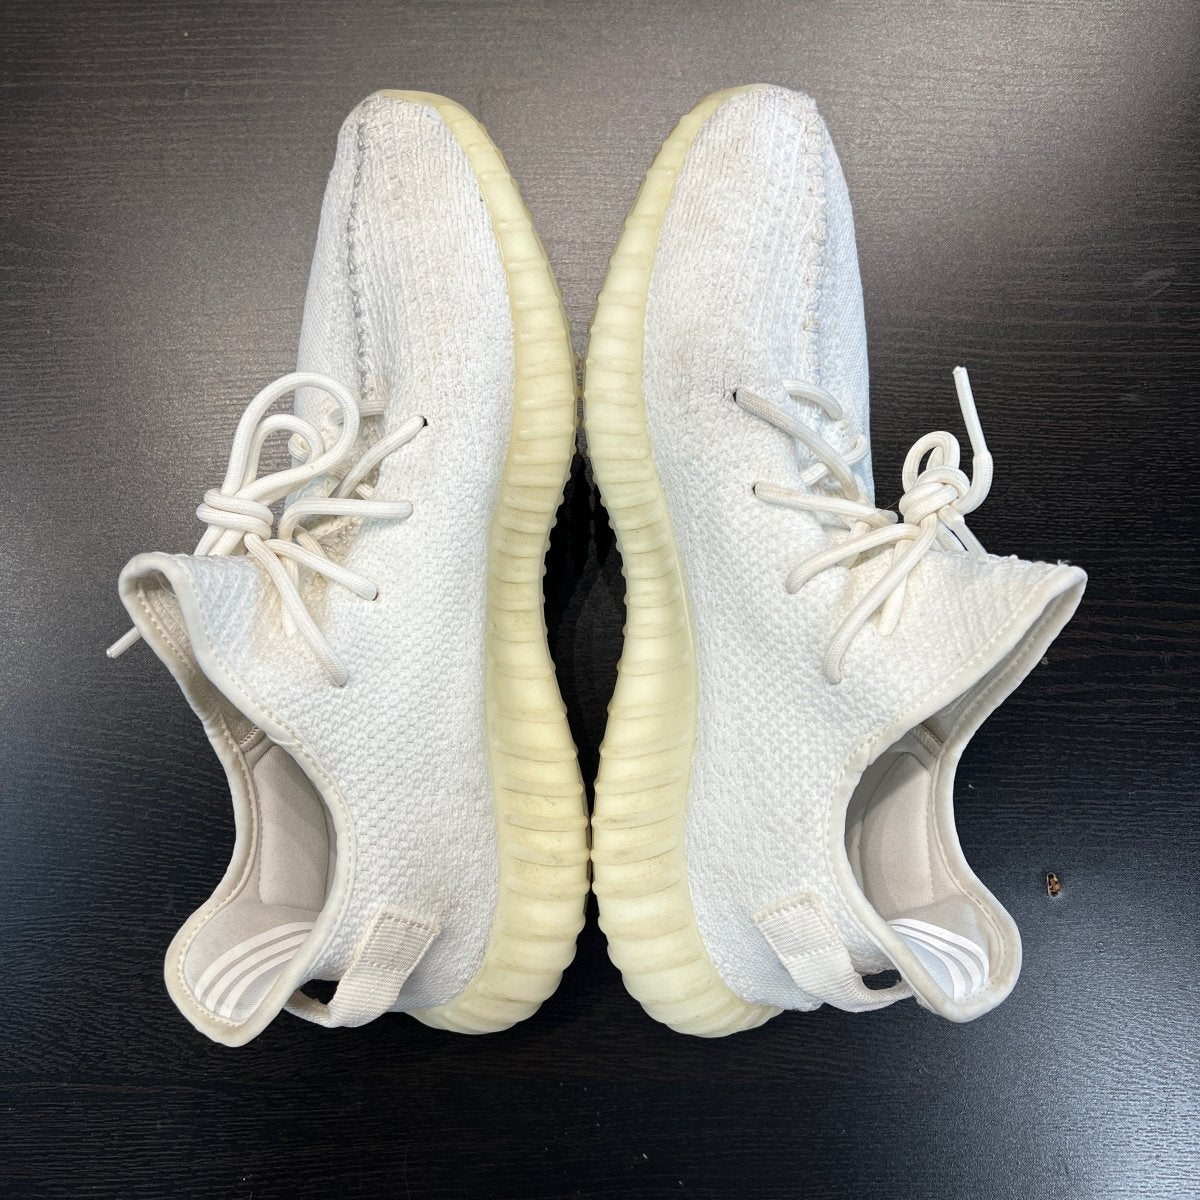 adidas Yeezy Boost 350 V2 Low Cream White / Triple White for Sale, Authenticity Guaranteed